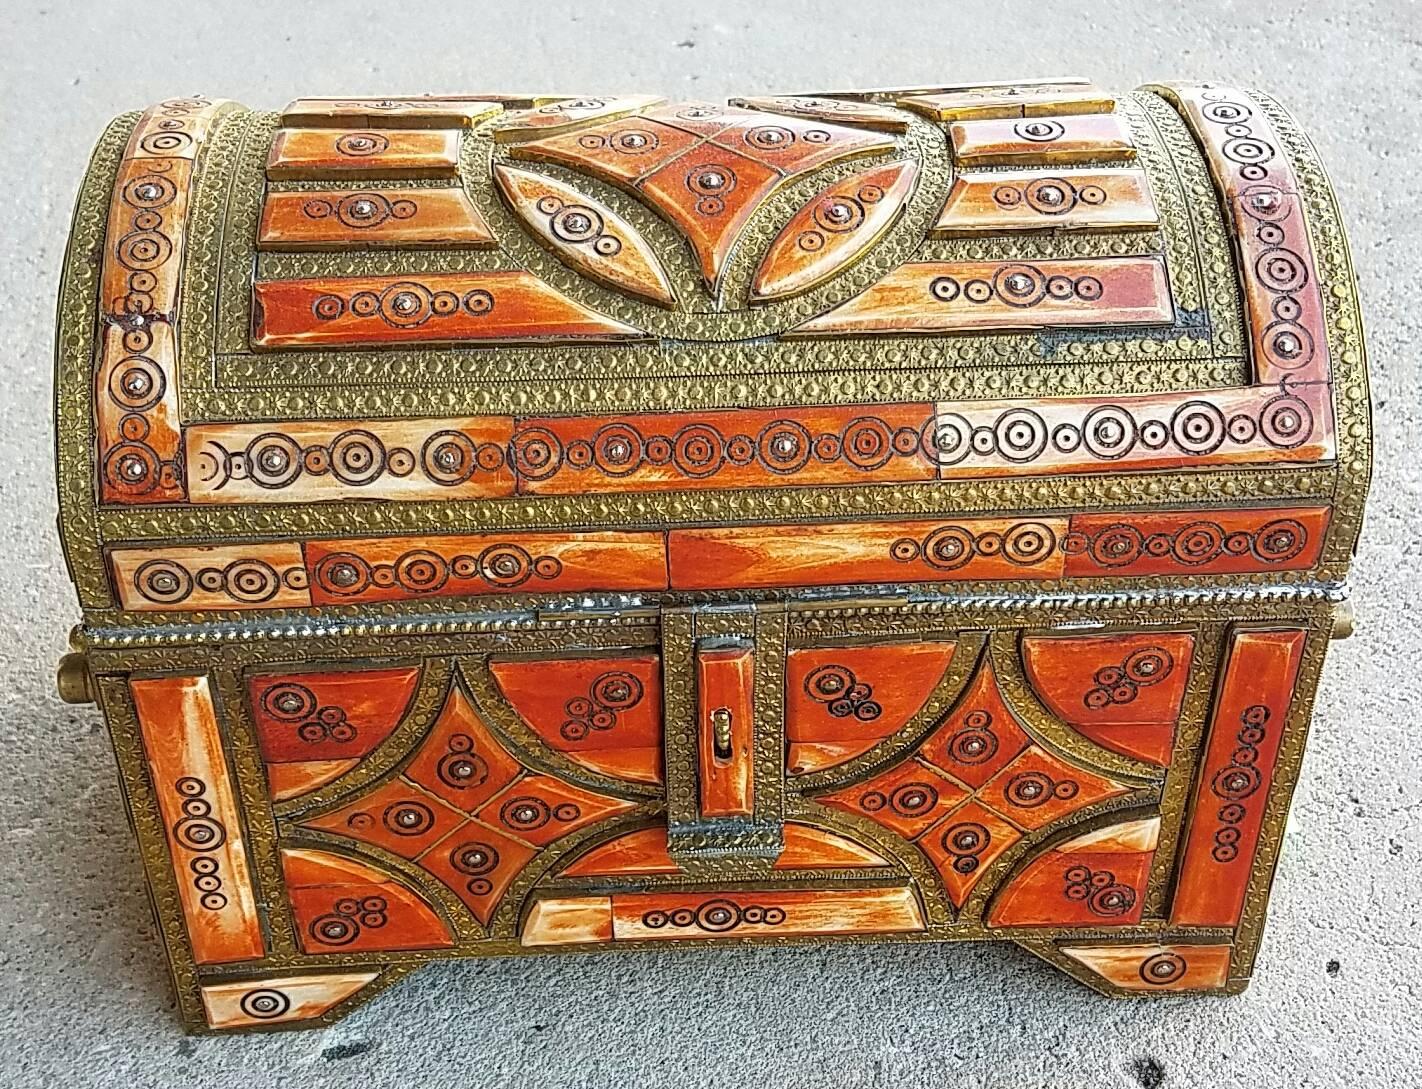 A beautiful Moroccan camel bone trunk from Marrakech. Camel bone dyed in Henna mixed with metal inlaid makes this trunk a great addition to any decor. Measuring approximately 12